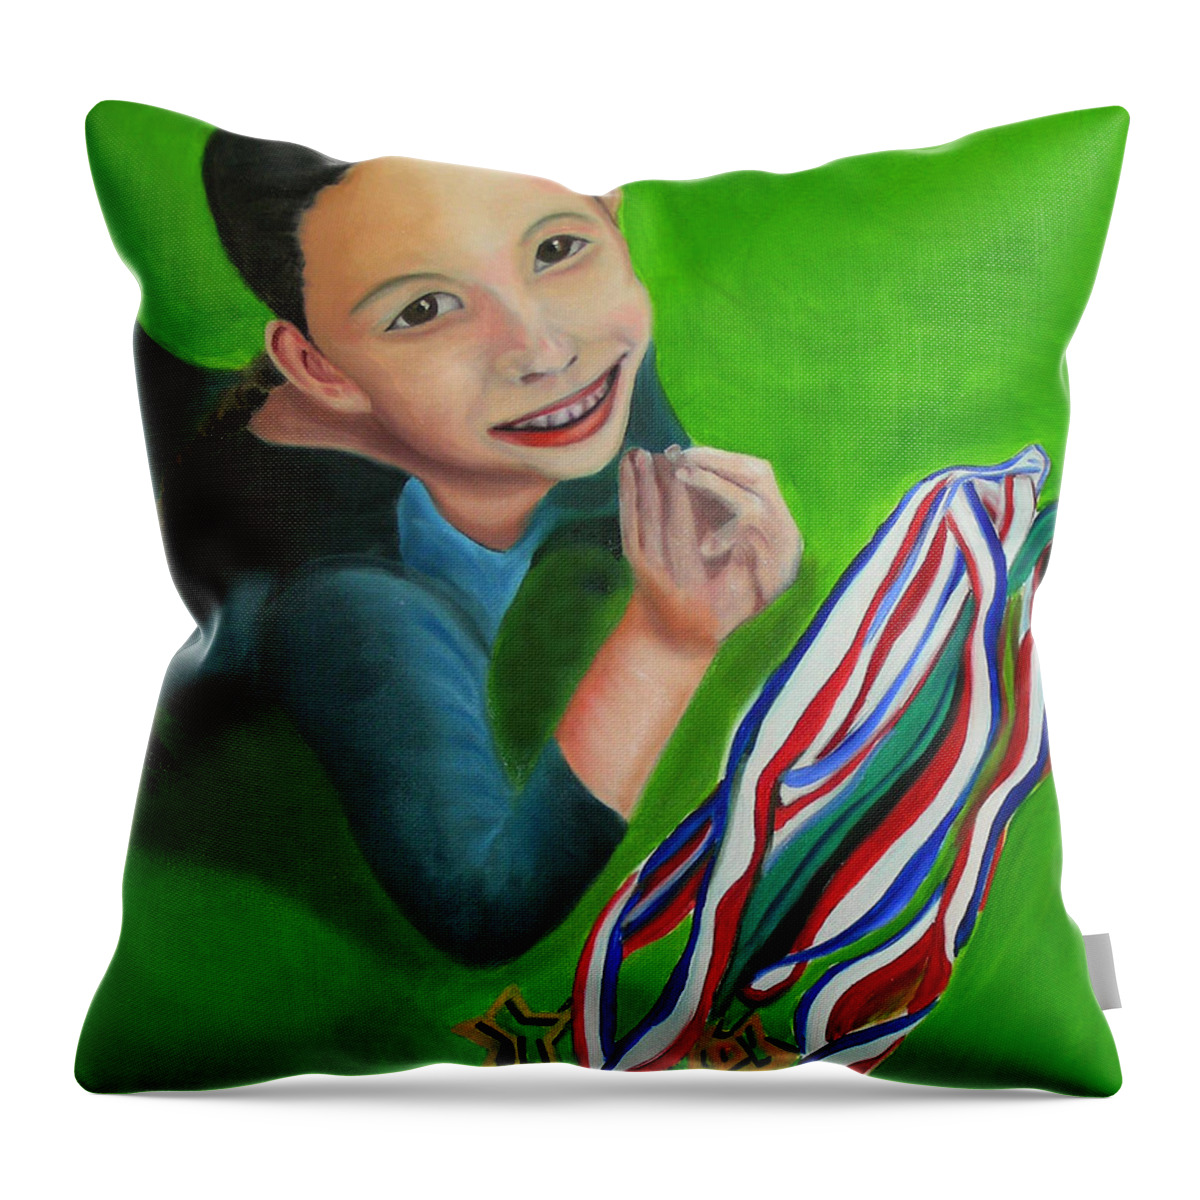 #glorso Throw Pillow featuring the painting Veronica by Dean Glorso